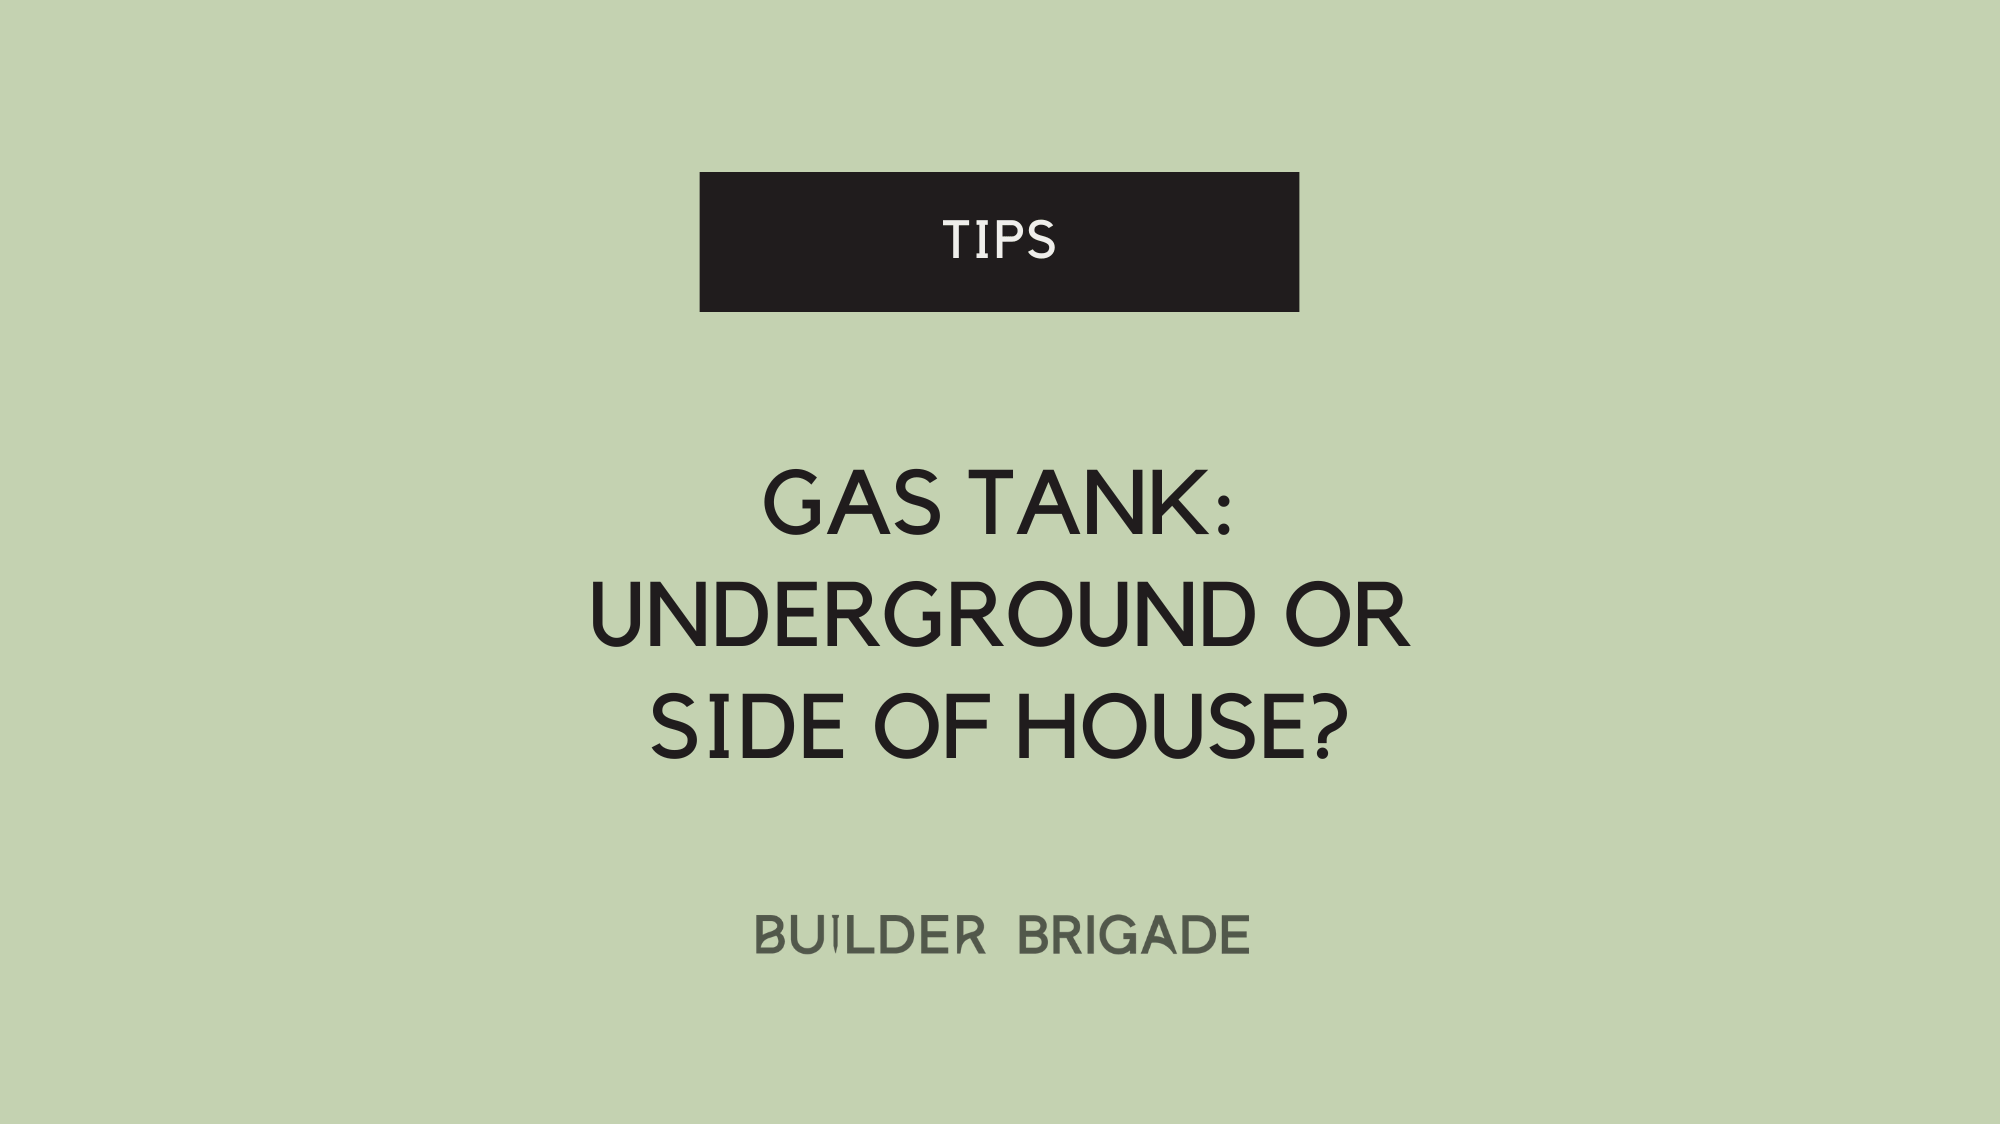 Gas Tank: Bury underground or on the side of the house?